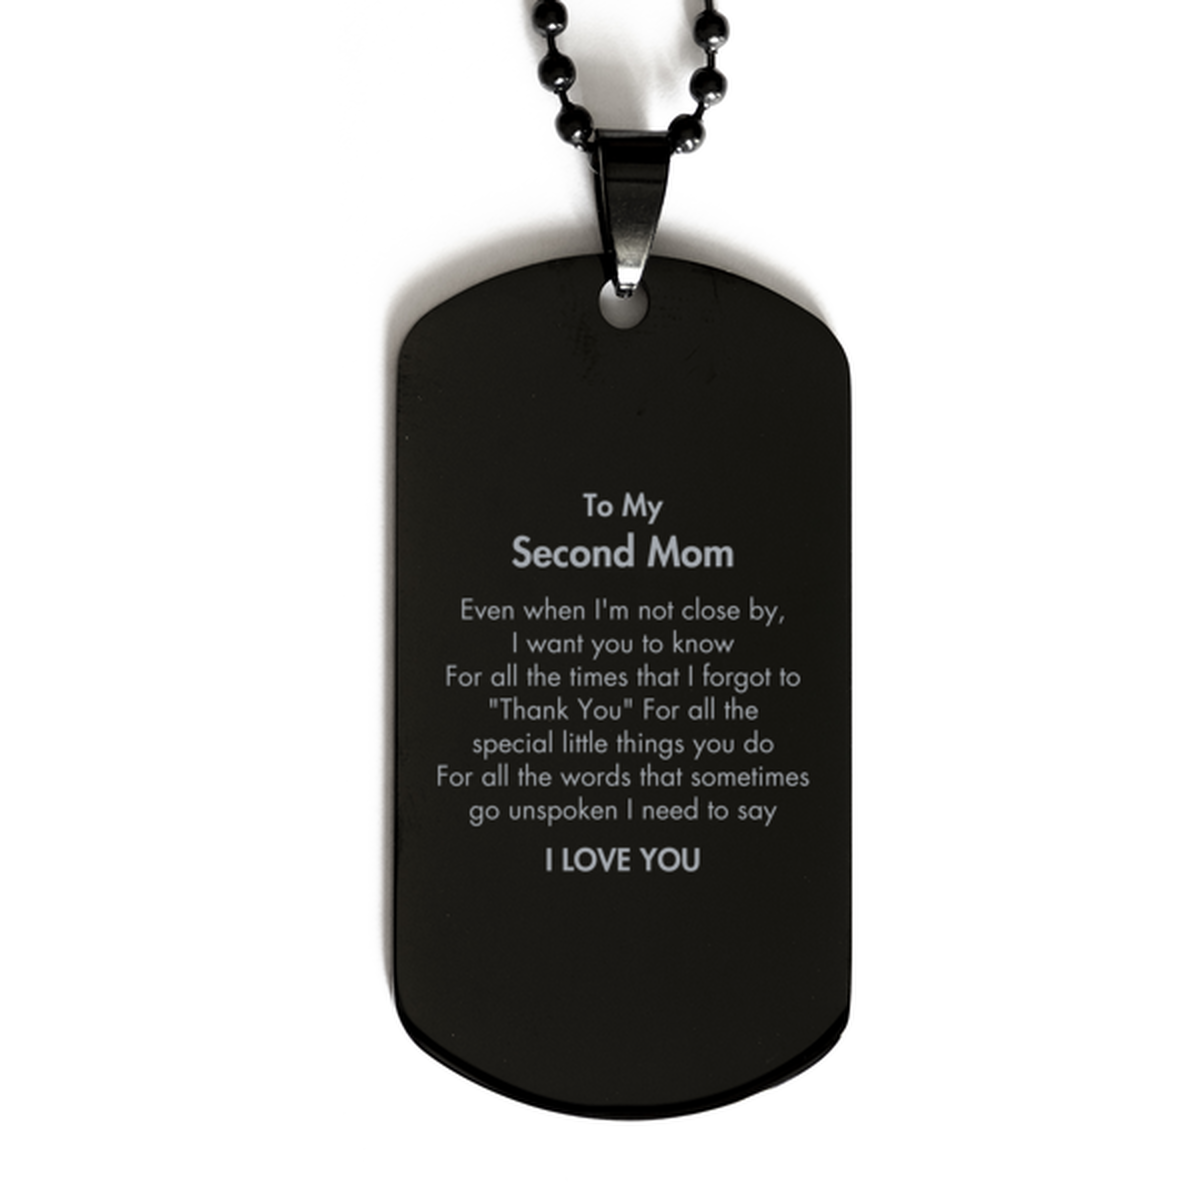 Thank You Gifts for Second Mom, Keepsake Black Dog Tag Gifts for Second Mom Birthday Mother's day Father's Day Second Mom For all the words That sometimes go unspoken I need to say I LOVE YOU